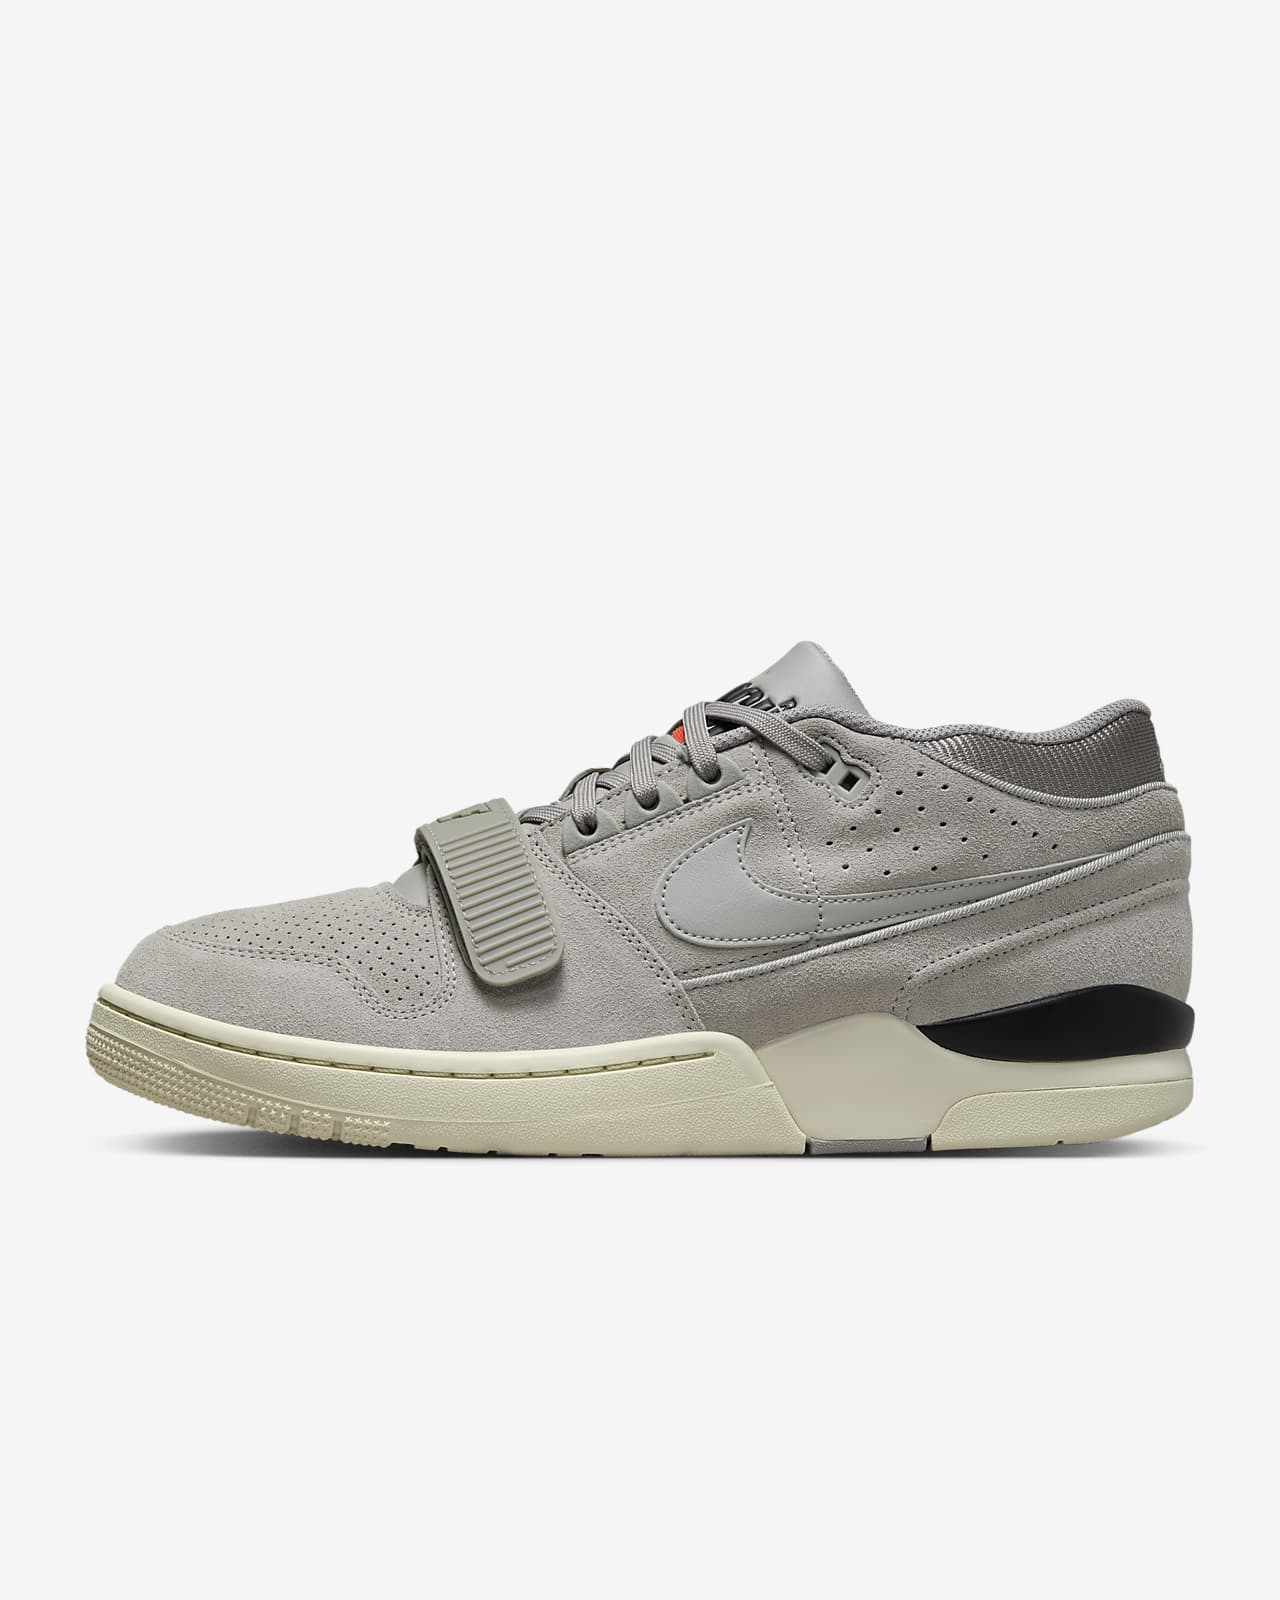 Chaussure Nike Air Alpha Force 88 Low pour homme